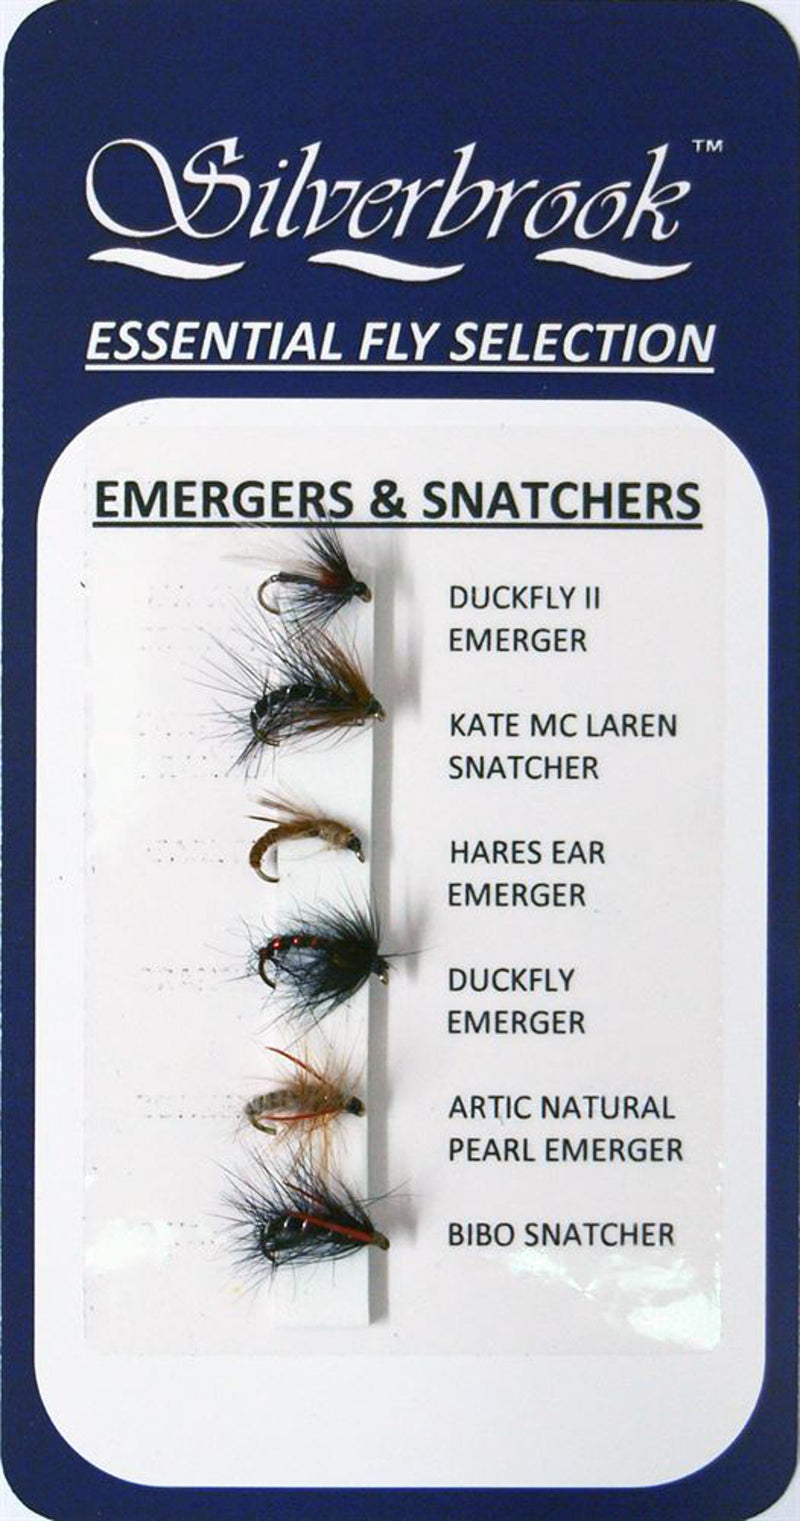 Silverbrook Essential Fly Selection EMERGERS & SNATCHERS - VIVADO